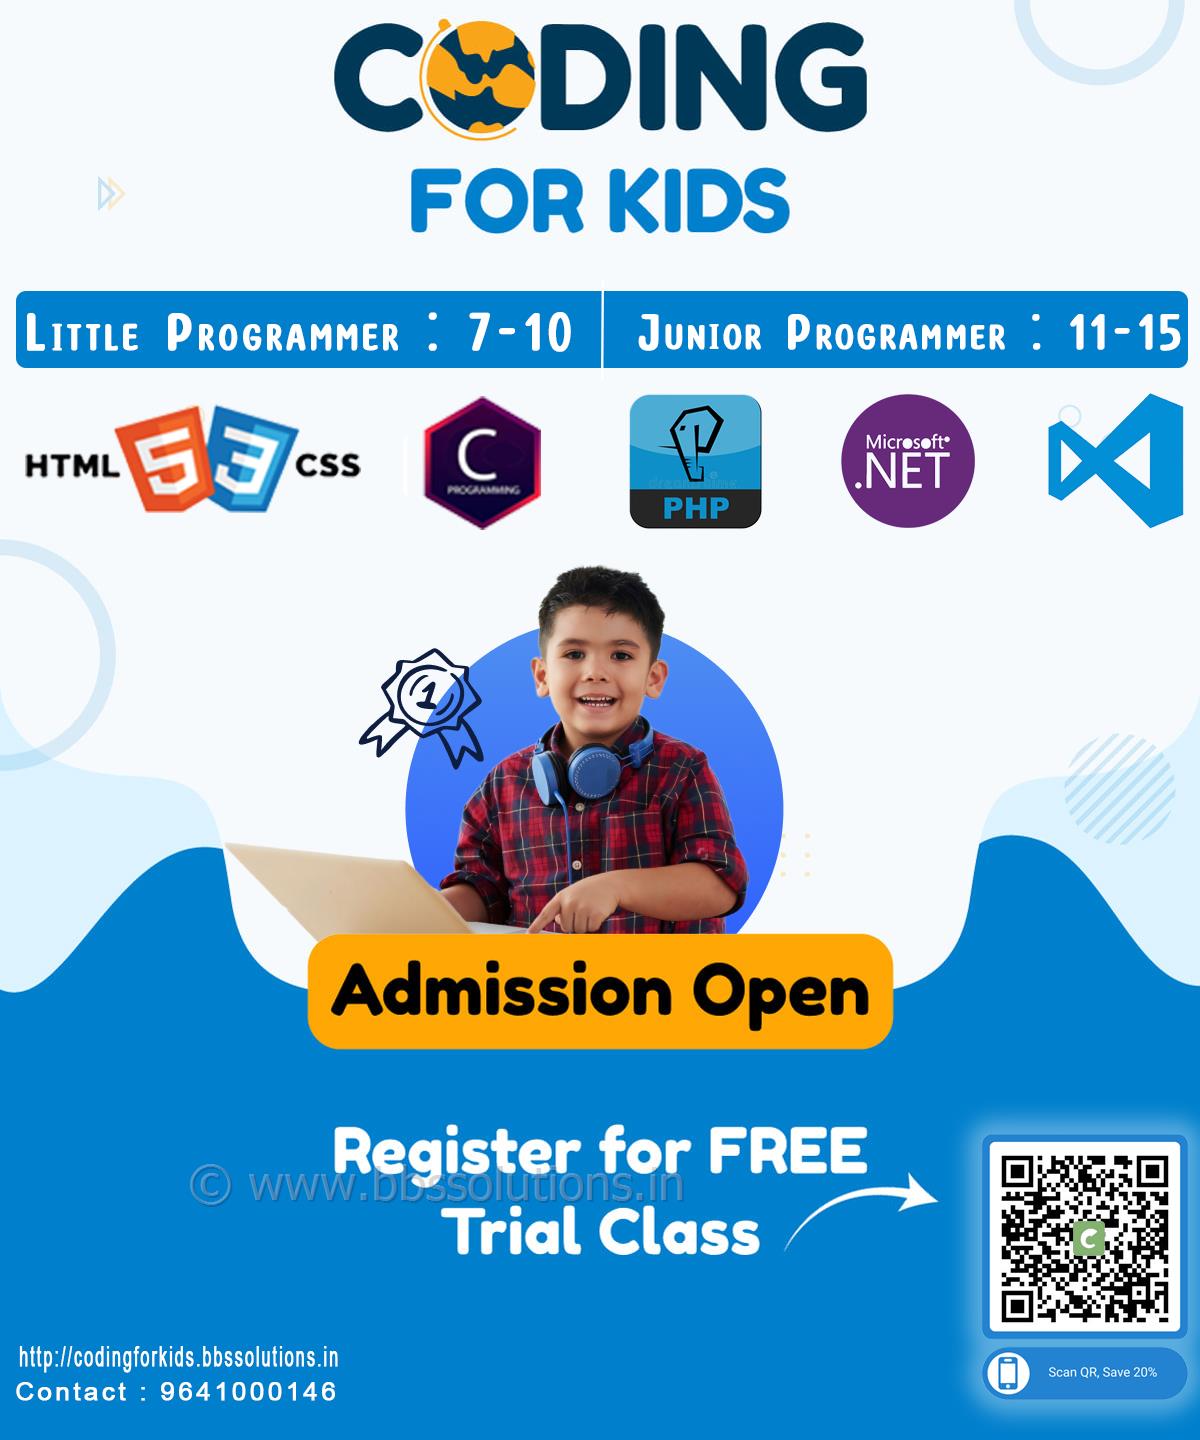 Coding for Kids: The Best Coding Classes in Dhupguri, Jalpaiguri, Siliguri, Falakata, Alipurduar, Mathavanga, Mainaguri, Birpara, Banarhat, and Gairkata with Coding for Kids  , Business Boost Software Solutions do Best Software ,Web Development,Mobile App solutions provider in siliguri , india, WestBengal , Assam , Siliguri , Jalpaiguri ,Dhupguri,
    Best website designing in Siliguri with affordable packages and quick support. Get effective website design in Siliguri from best website designers. #bbssolutions , #SEO  , #DigitalMarketing  , #WebDesign  , #SoftwareDevelopment  , #FacebookAds  , #GoogleAds  , #GoogleSEO  , #WebsiteDesigning 
     , #Software  , #website  , #BusinessBoostSoftwareSolutions  , bbssolutions,SEO, Digital Marketing, WebDesign, Software Development, Facebook Ads, Google Ads, Google SEO, Website Designing, 
    Software, website, Business Boost Software Solutions, 9641000146,7478180650,best GST software in West bengal,Best GST software company in north bengal,GST solution in west bengal
    ,gst solutions in north bengal,best customize software in siliguri , india,best customize software in west bengal,best customize software in dhupguri,news portal website in west bengal
    ,news portal website in siliguri , india,regional news portal website in siliguri , india,school software in west bengal,school software in north bengal,school website in north bengal,
    school software in north bengal,android app, ios app, ecommerce website, ecommerce software,Web designing, website designing, ecommerce website, how to make website, create website, 
    website development company, web page design, seo, search engine optimization, seo siliguri , india , 
    seo company, best seo company, seo services, responsive web design, web designing companies, 
    how to create a website, internet marketing, digital marketing, online marketing, social media marketing, 
    promotion,web designing in Siliguri,web designing in Siliguri siliguri , india,web designing in siliguri , india,GST Software  ,  GST Billing Software  ,  GST Accounting  ,  GST Ready Software,
    software company in siliguri,software company in siliguri siliguri , india,software company in north east siliguri , india,
    school software in siliguri,school software in north east siliguri , india,customize software,free software demo,
    reasonable price software,cost effective software,resonable price software,free demo software,free software,best software support,free software support,best software company in siliguri , india,
    best software company in siliguri,MLM Software company in Siliguri,Binary Software company in Siliguri,
    top ten software company in north bengal,top ten software company in siliguri,top ten software company in siliguri , india,
    top ten software company in north east,software development siliguri , india,west bengal,kolkata,siliguri , software company in siliguri , india
     , software development west bengal , Customized software siliguri , india , software for hotel,medicine distributors,
    jewellery shop , best software company in siliguri,jalpaiguri,sikkim,darjeeling  , Business Boost Softwate Solutions  ,  
    Web designing company in siliguri  ,  ecommerce designing company in siliguri  ,  web development company in siliguri  ,  
    software development comapny in siliguri  ,  software development in sikkim  ,  website designing company in sikkim  ,  
    SEO service in sikkim  ,  web designing company in siliguri  ,  web designing compnay in North Bengal  ,  
    SEO service in siliguri  ,  web designing in north bengal  ,  web designing in north east siliguri , india , website designing in siliguri, best website designing in siliguri, web design, web designer in siliguri, web designing company siliguri